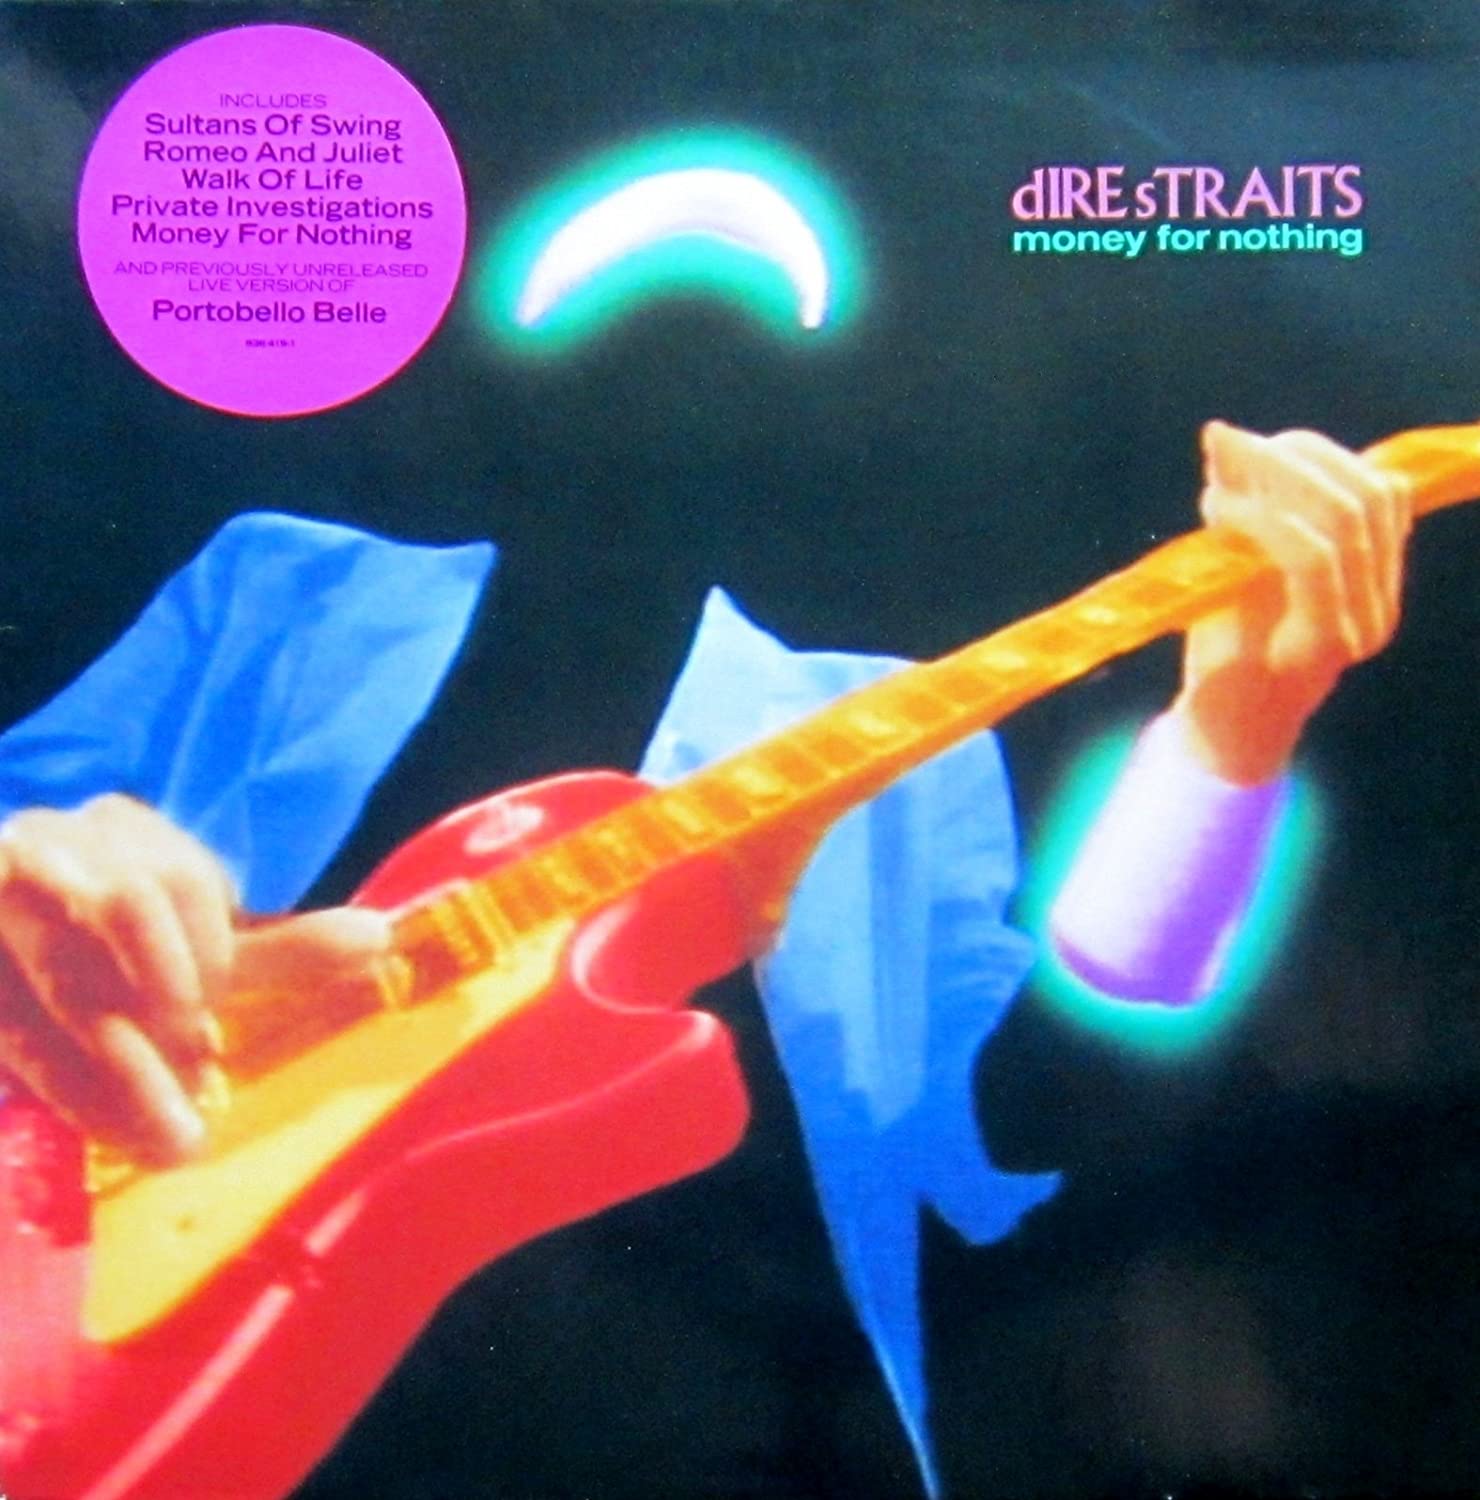 Money for Nothing by Dire Straits